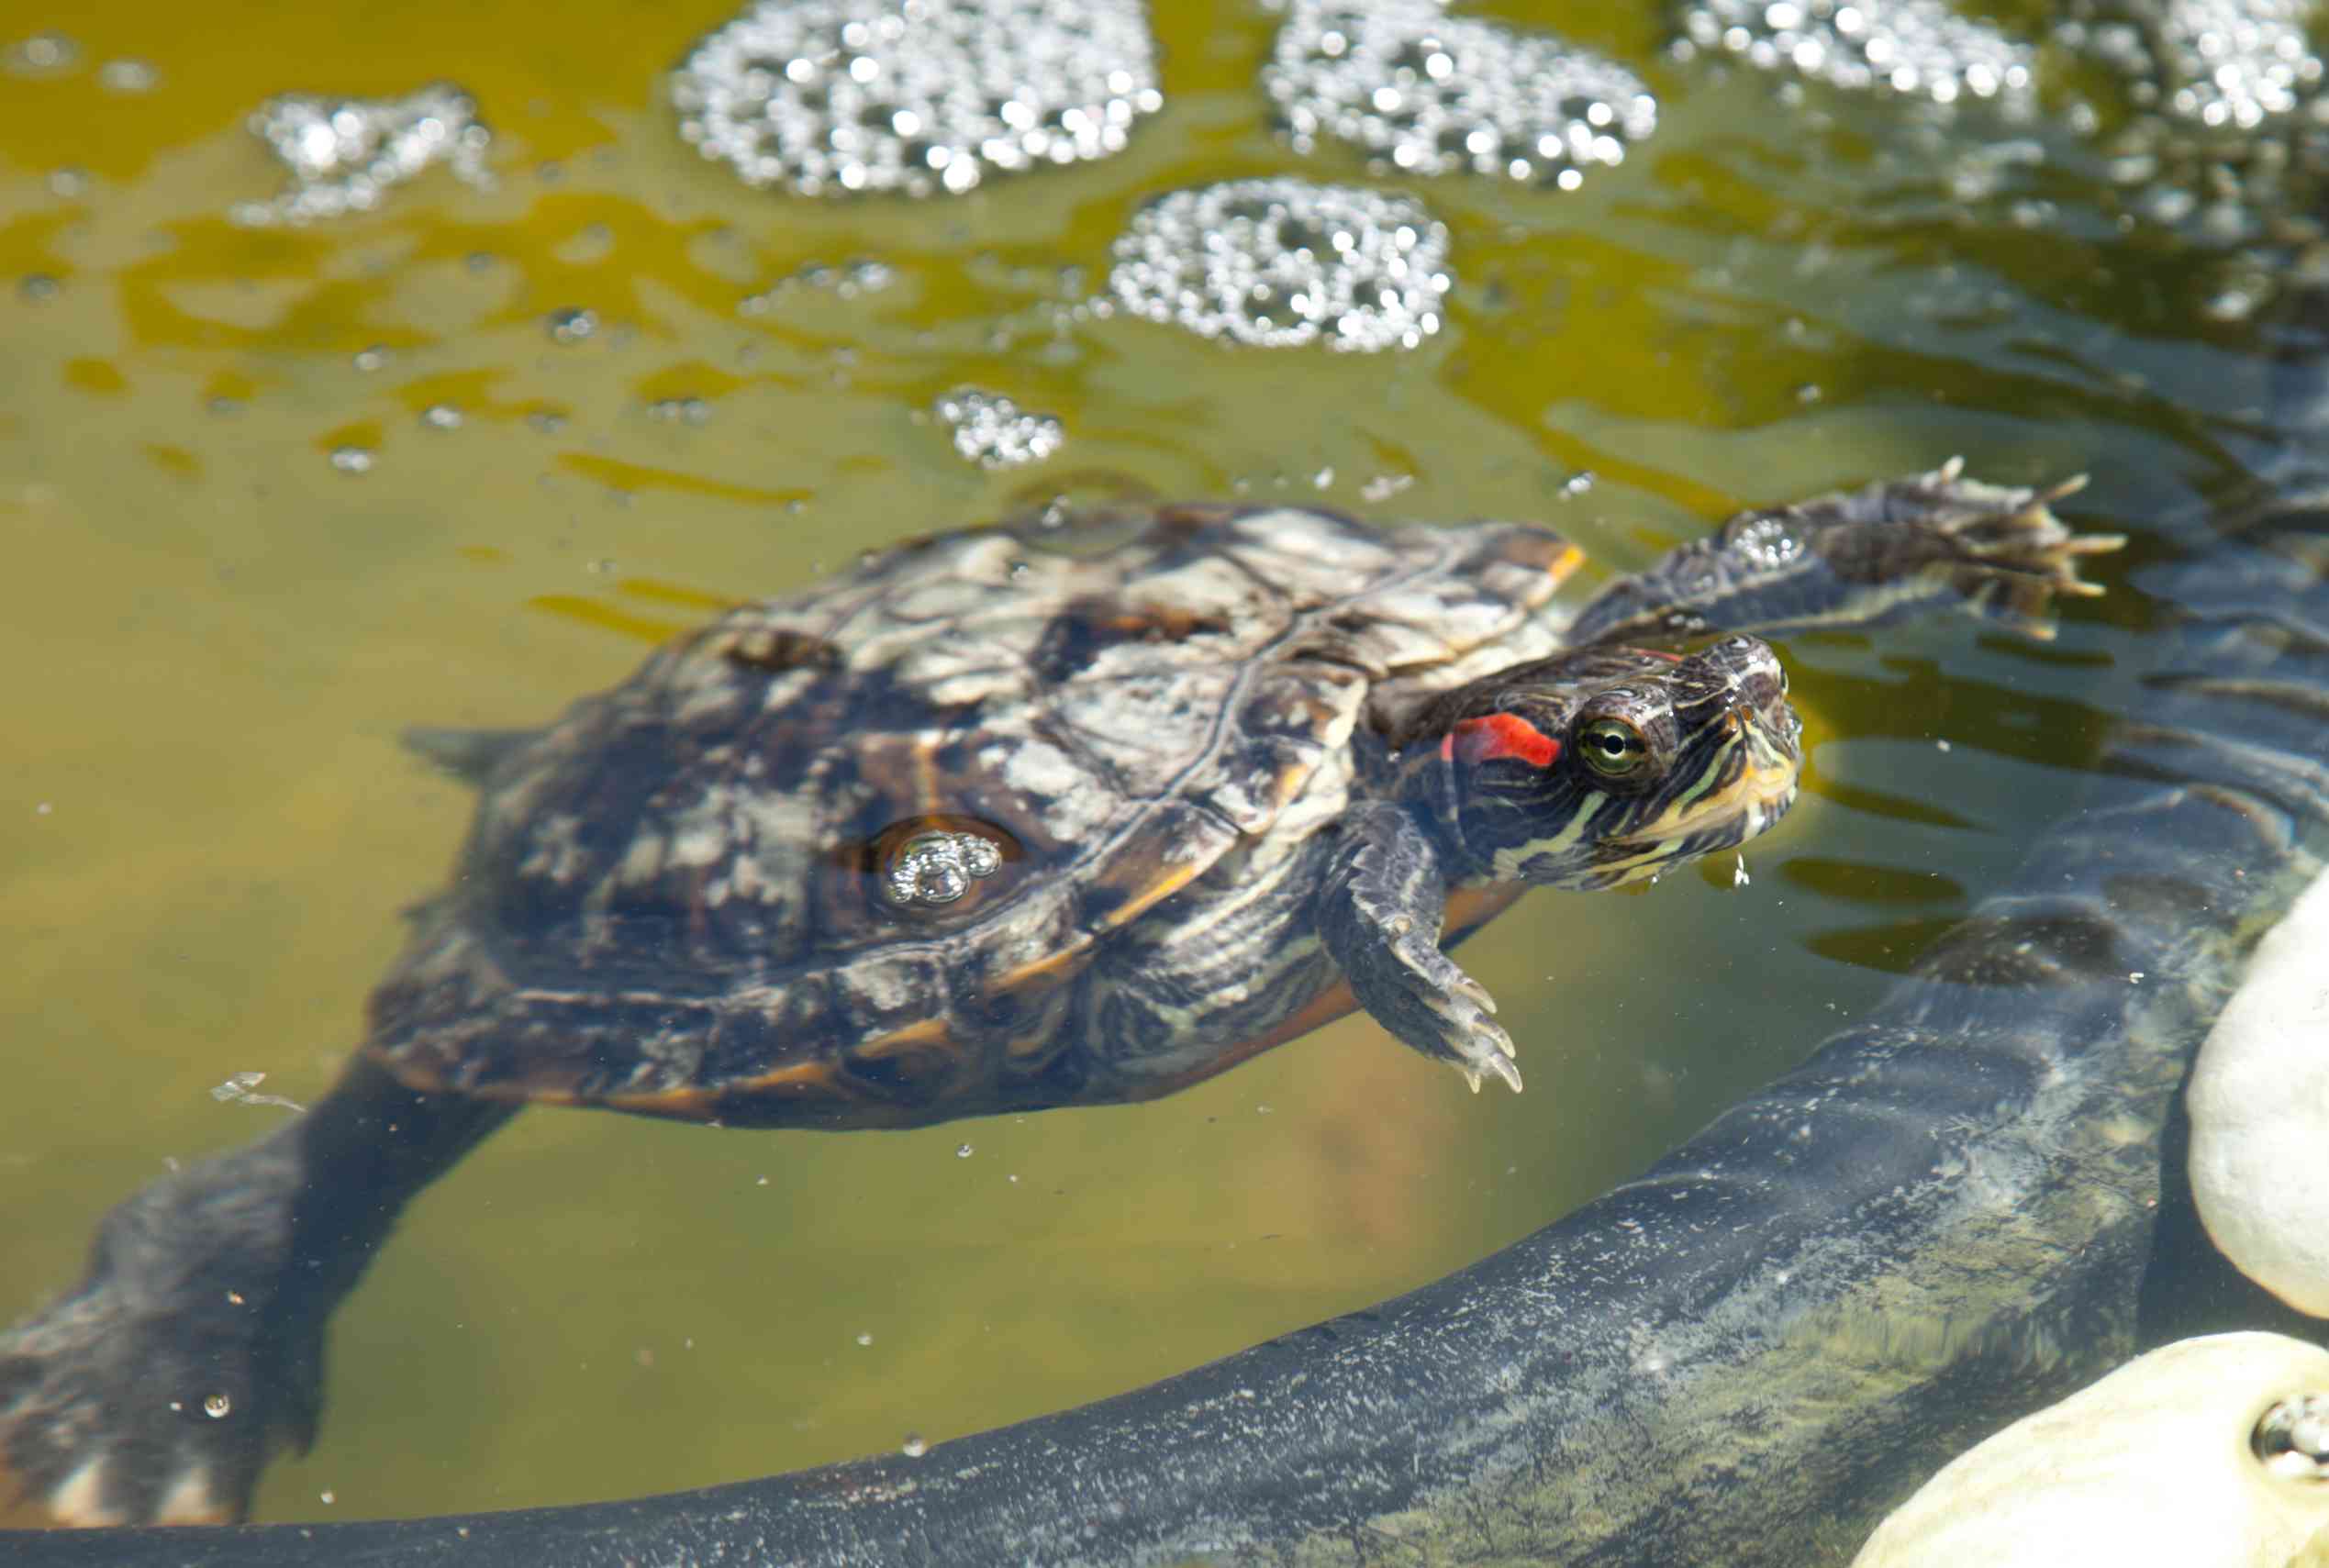 Red eared slider in a pond